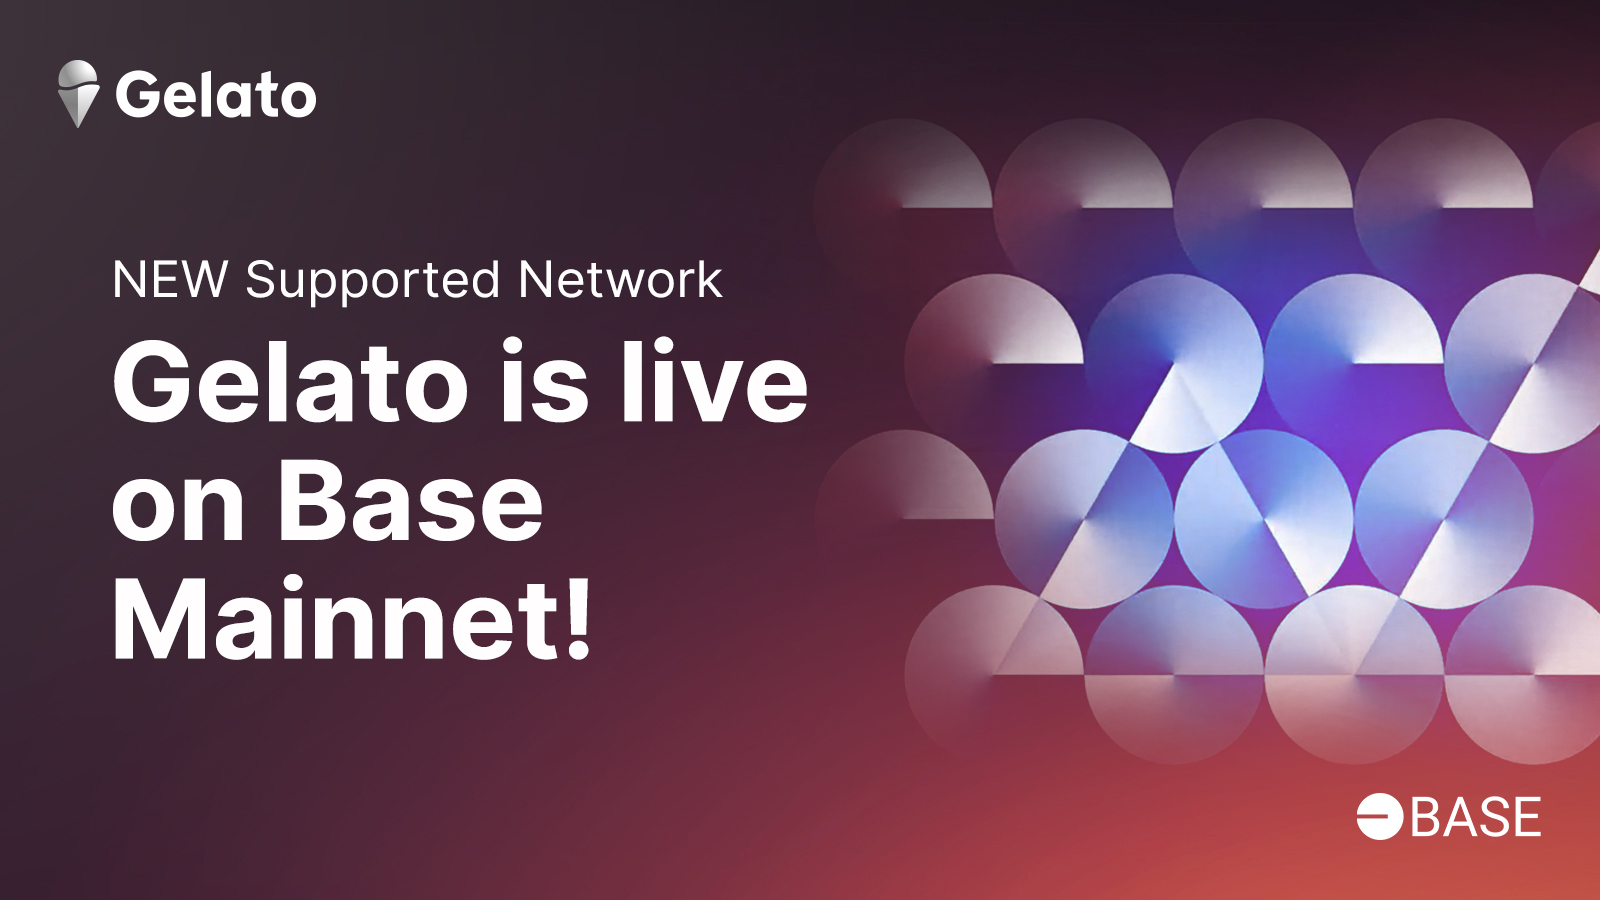 Gelato is Now Live on the Base Mainnet!